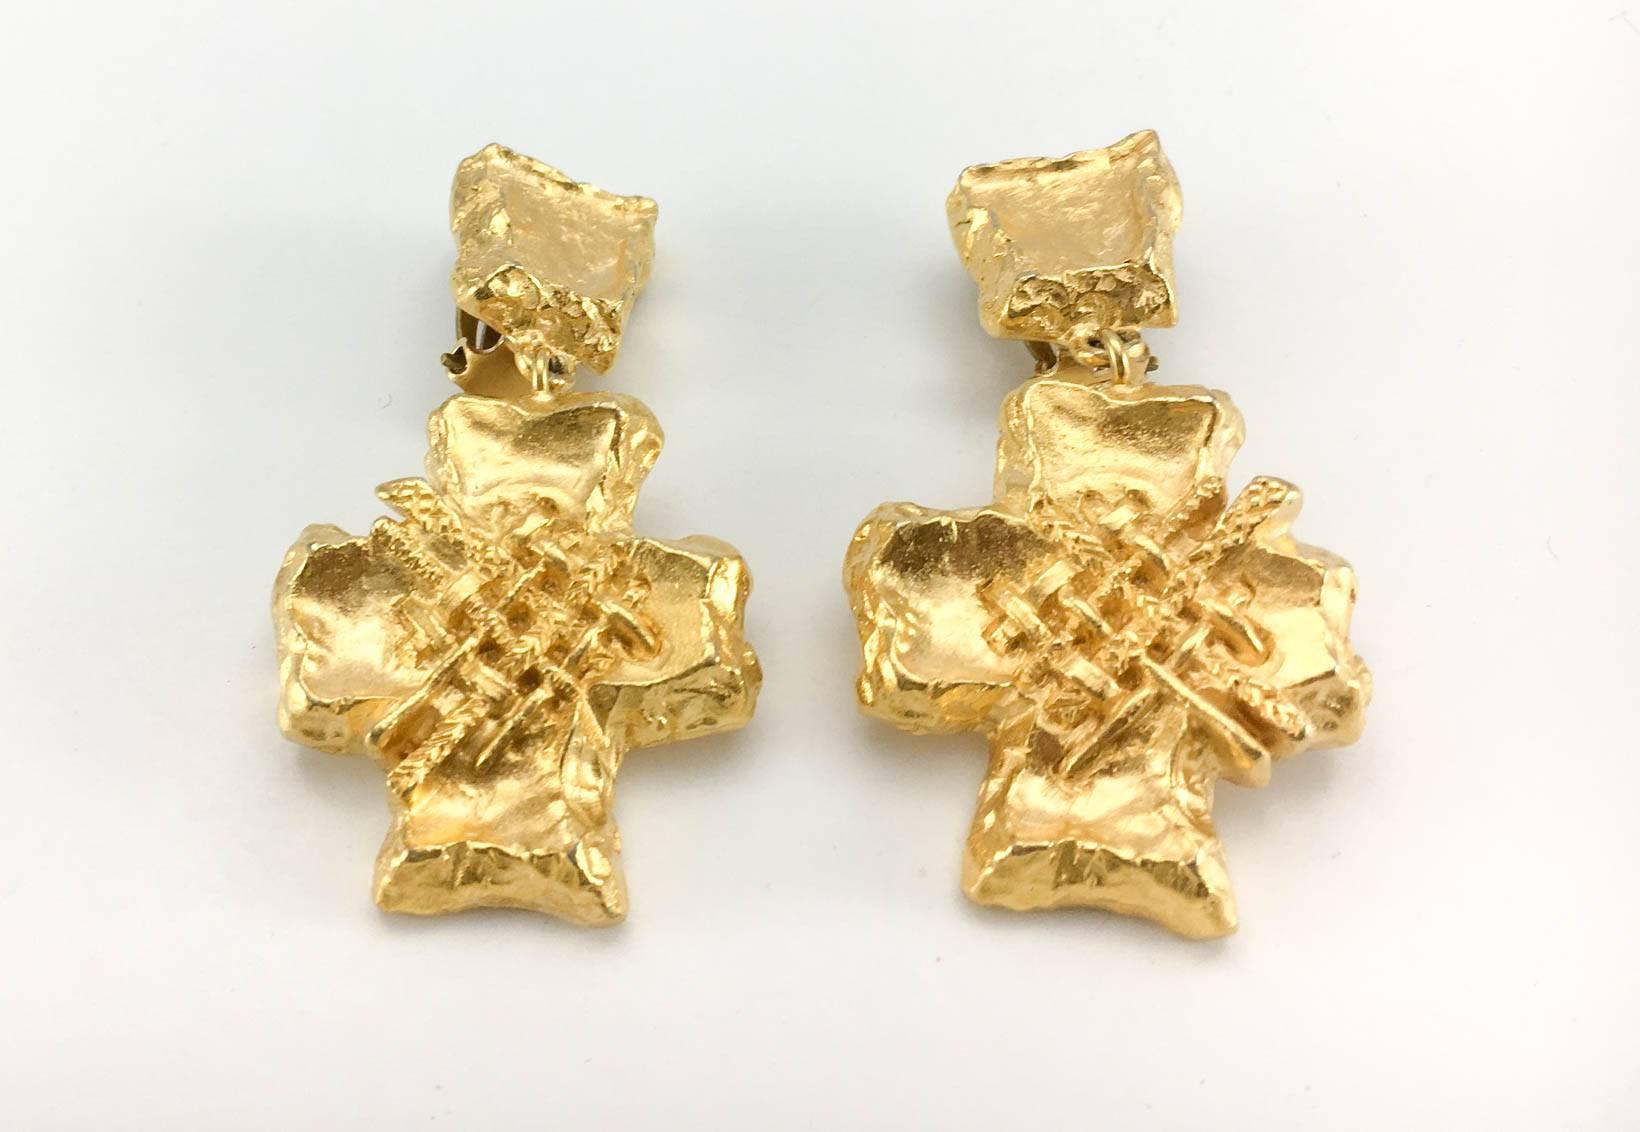 Lacroix Stylized Gold-Plated Cross, by Goossens - 1980s 1